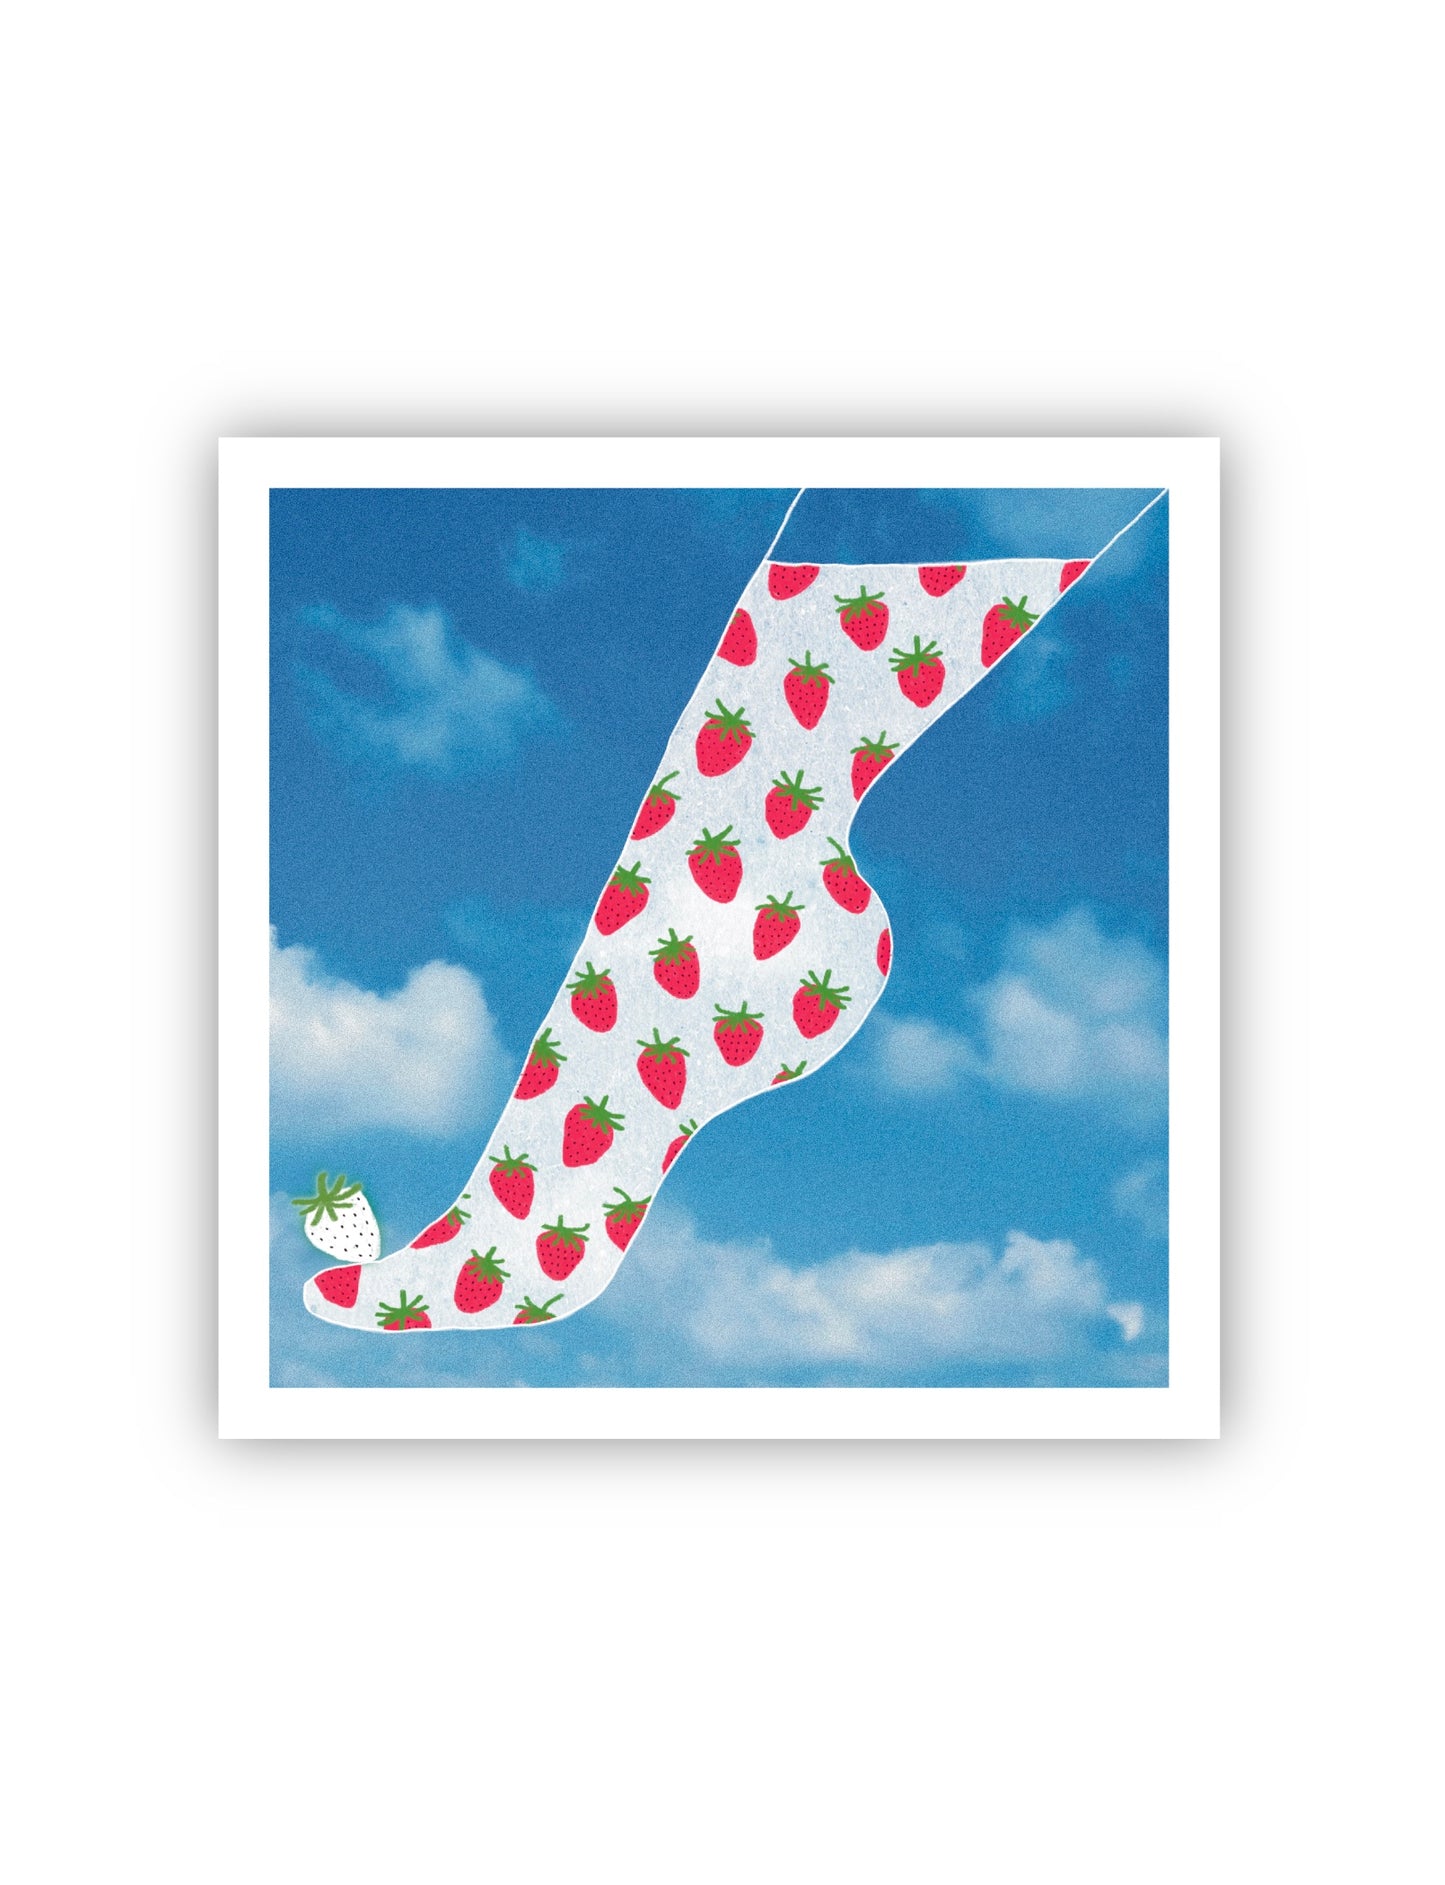 Dreamy 8x8 square art print of an illustration of a feet with white socks full of strawberries on a blue sky